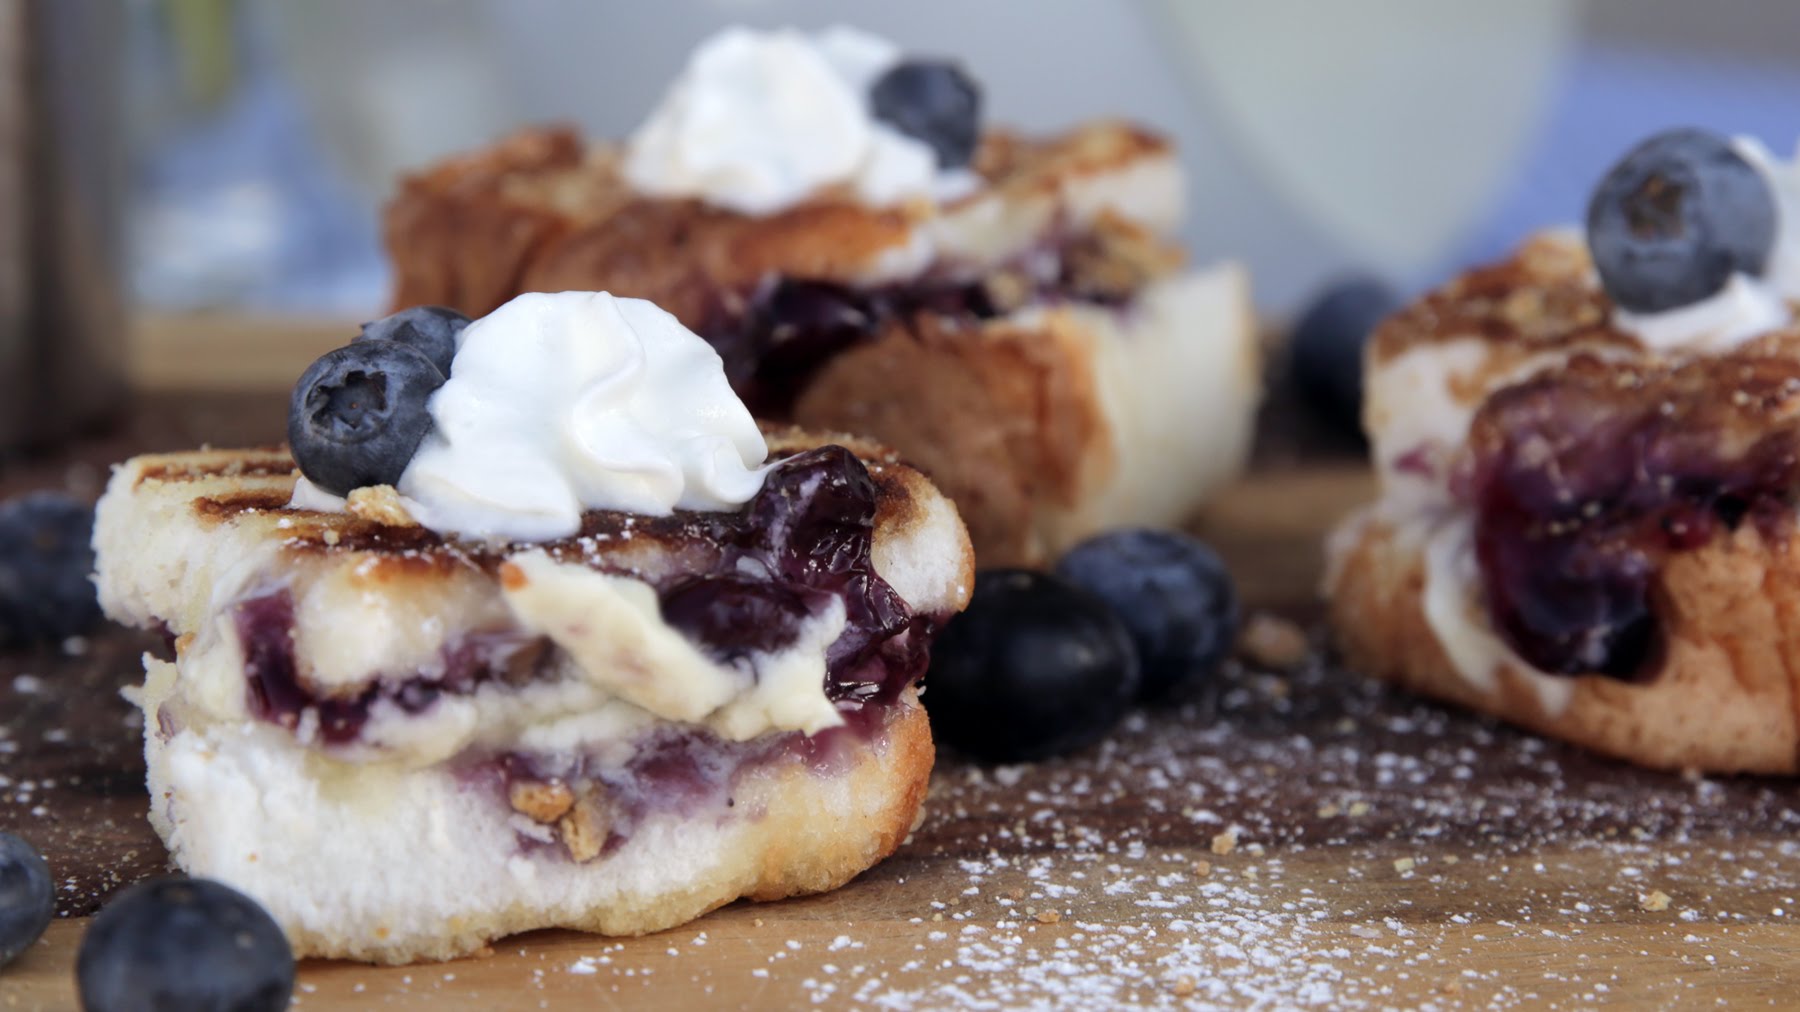 How To Make Grilled Blueberry Cheesecake